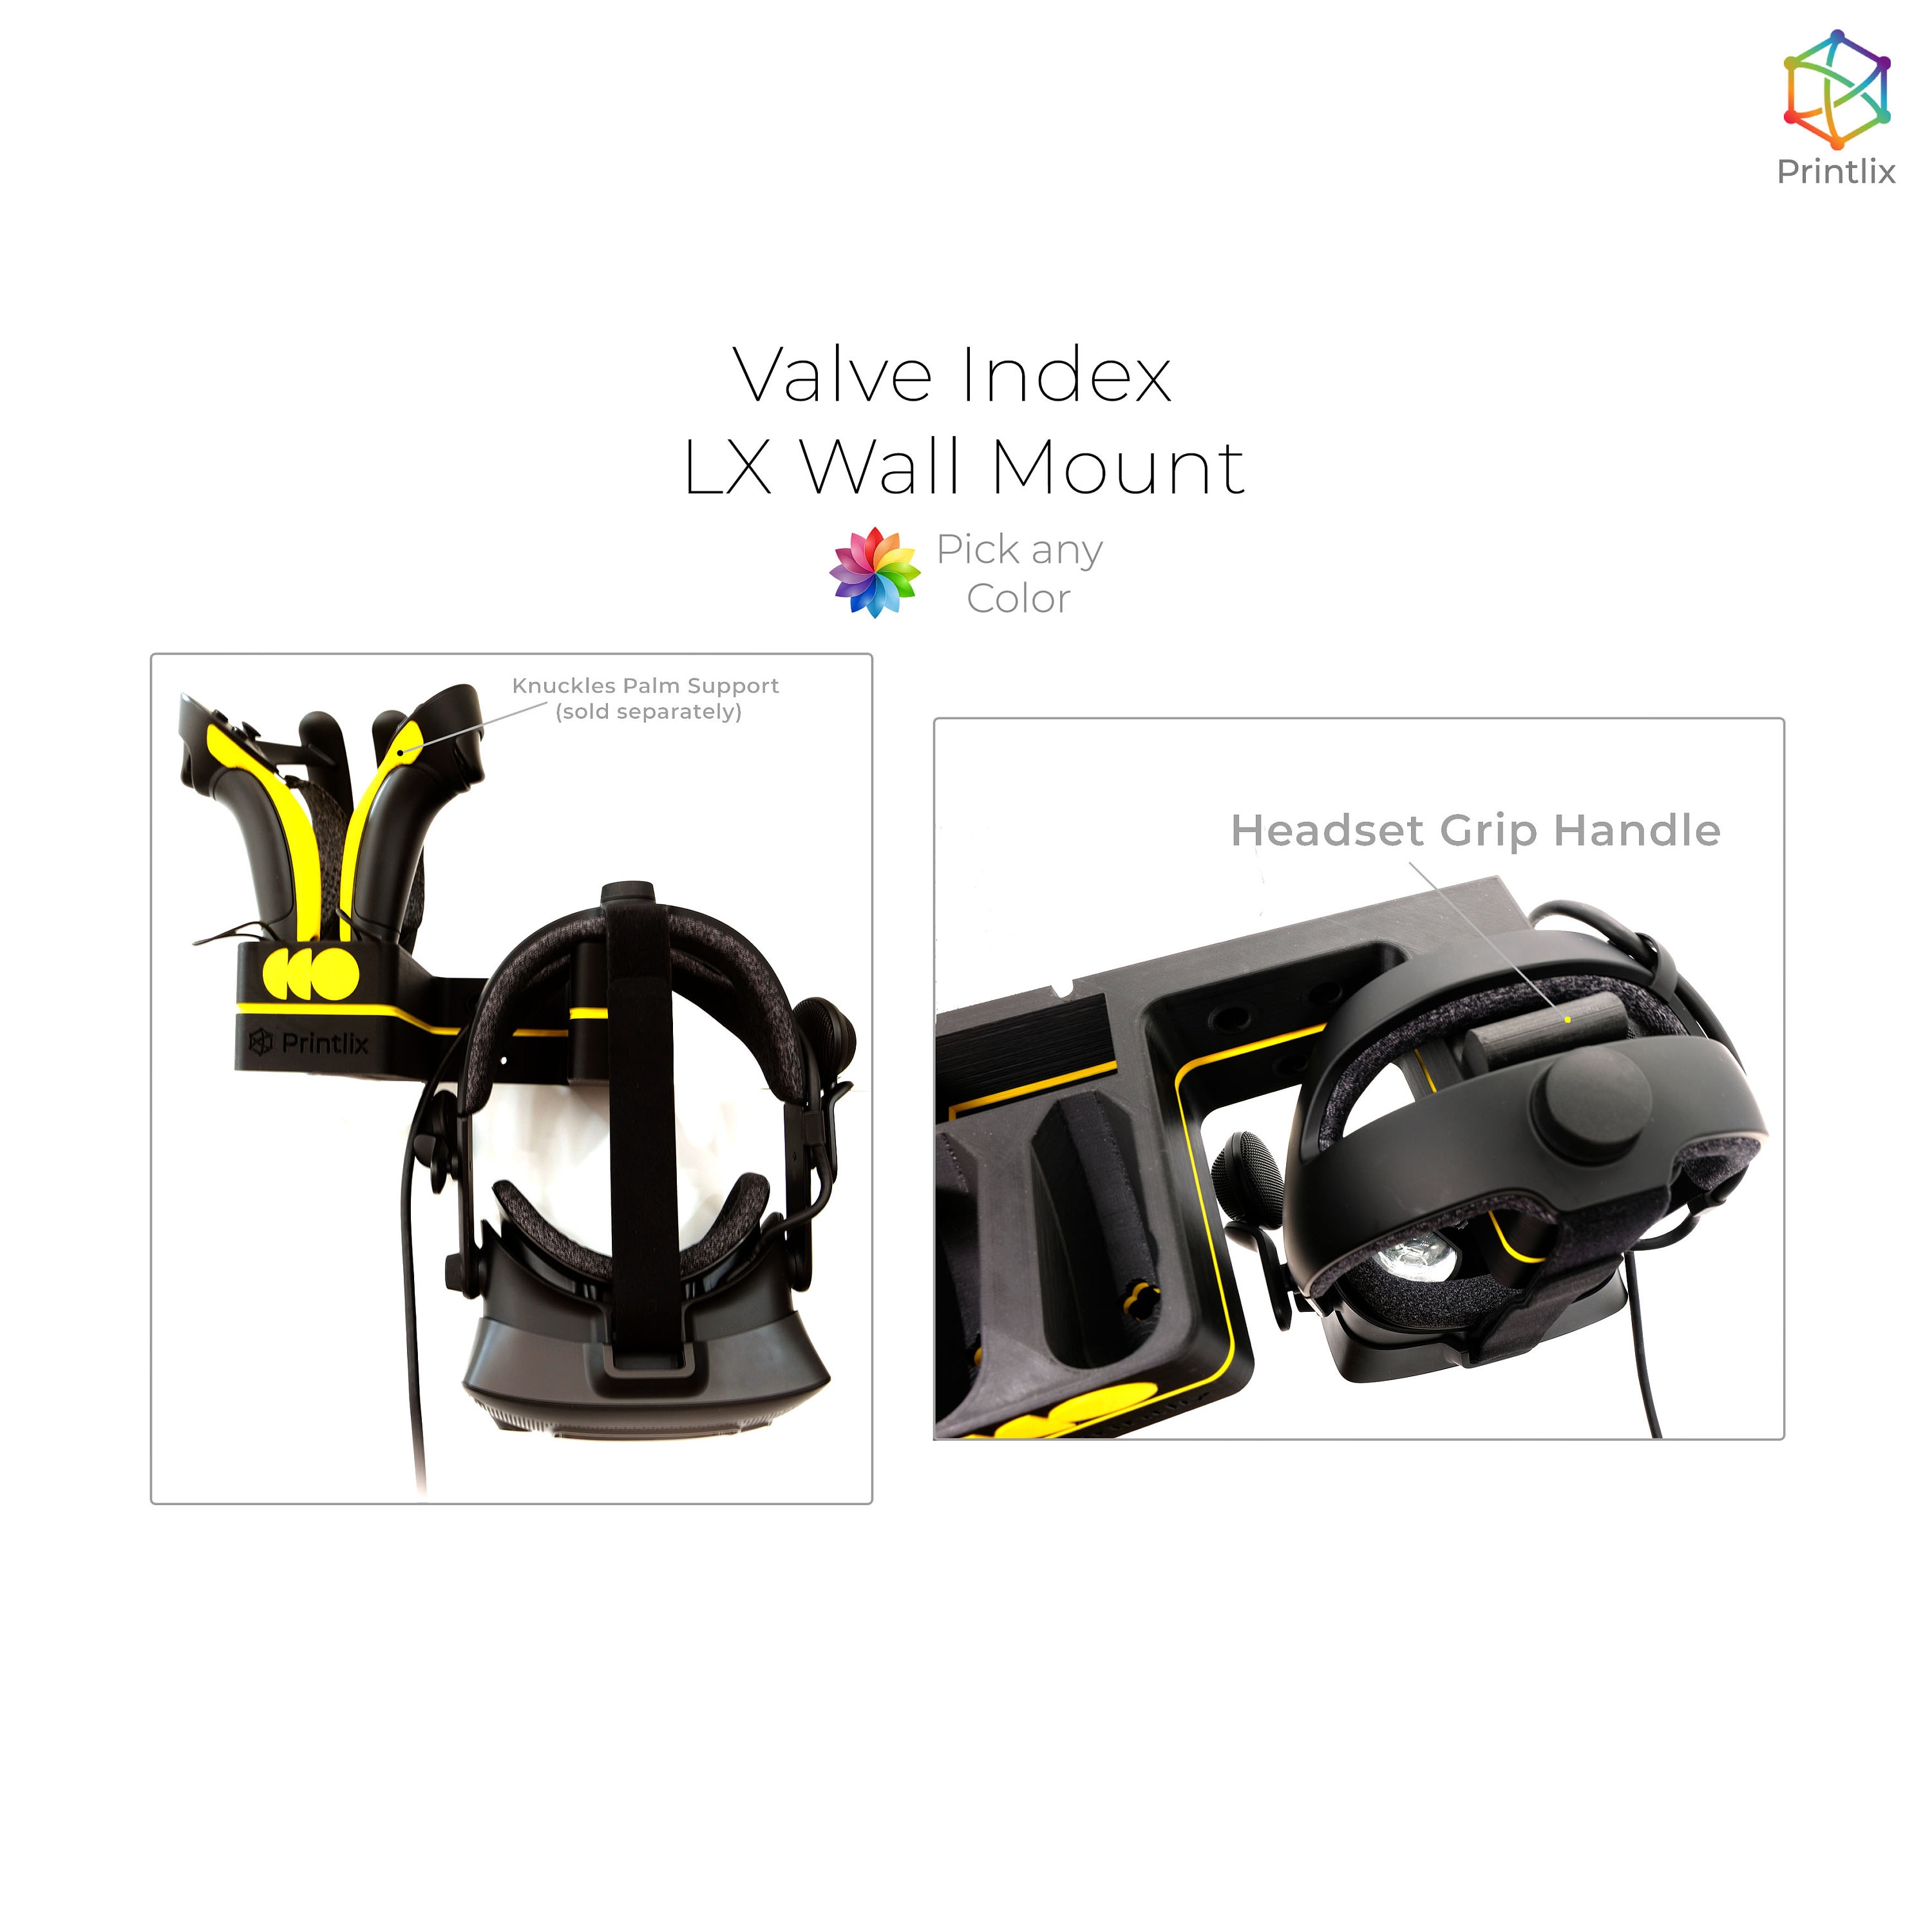 Valve Index review: the gold standard of VR headsets